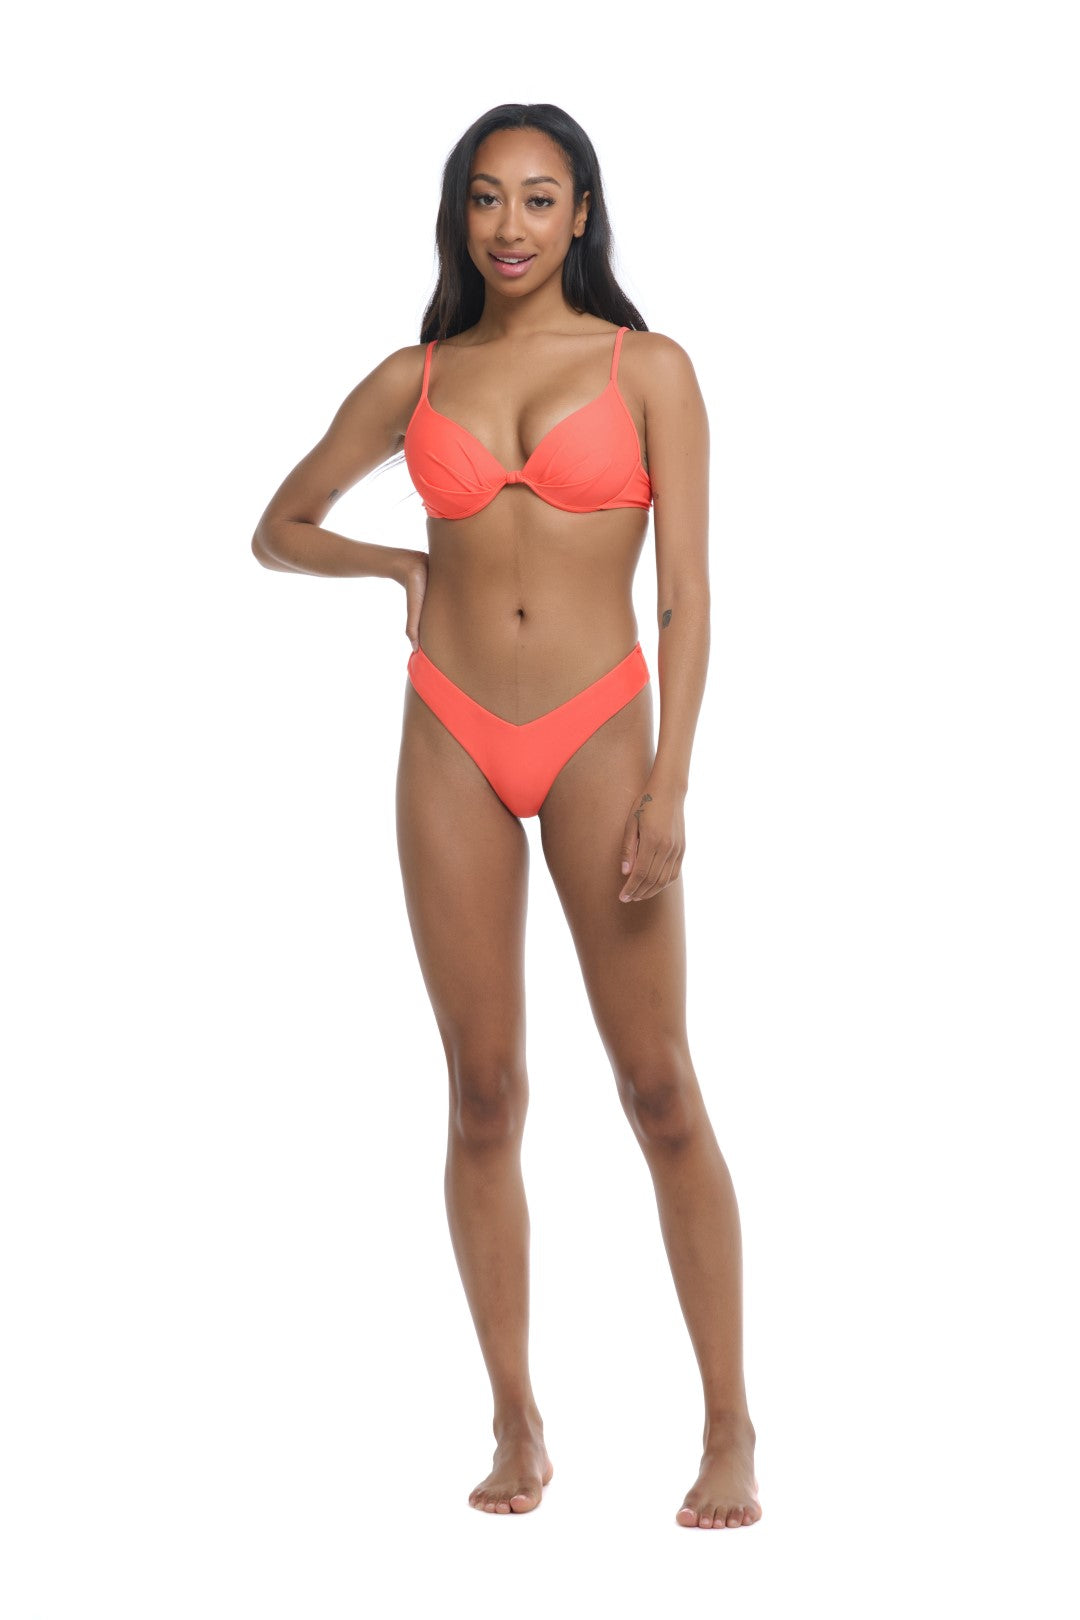 Kendal Body Glove stockings in Coral color